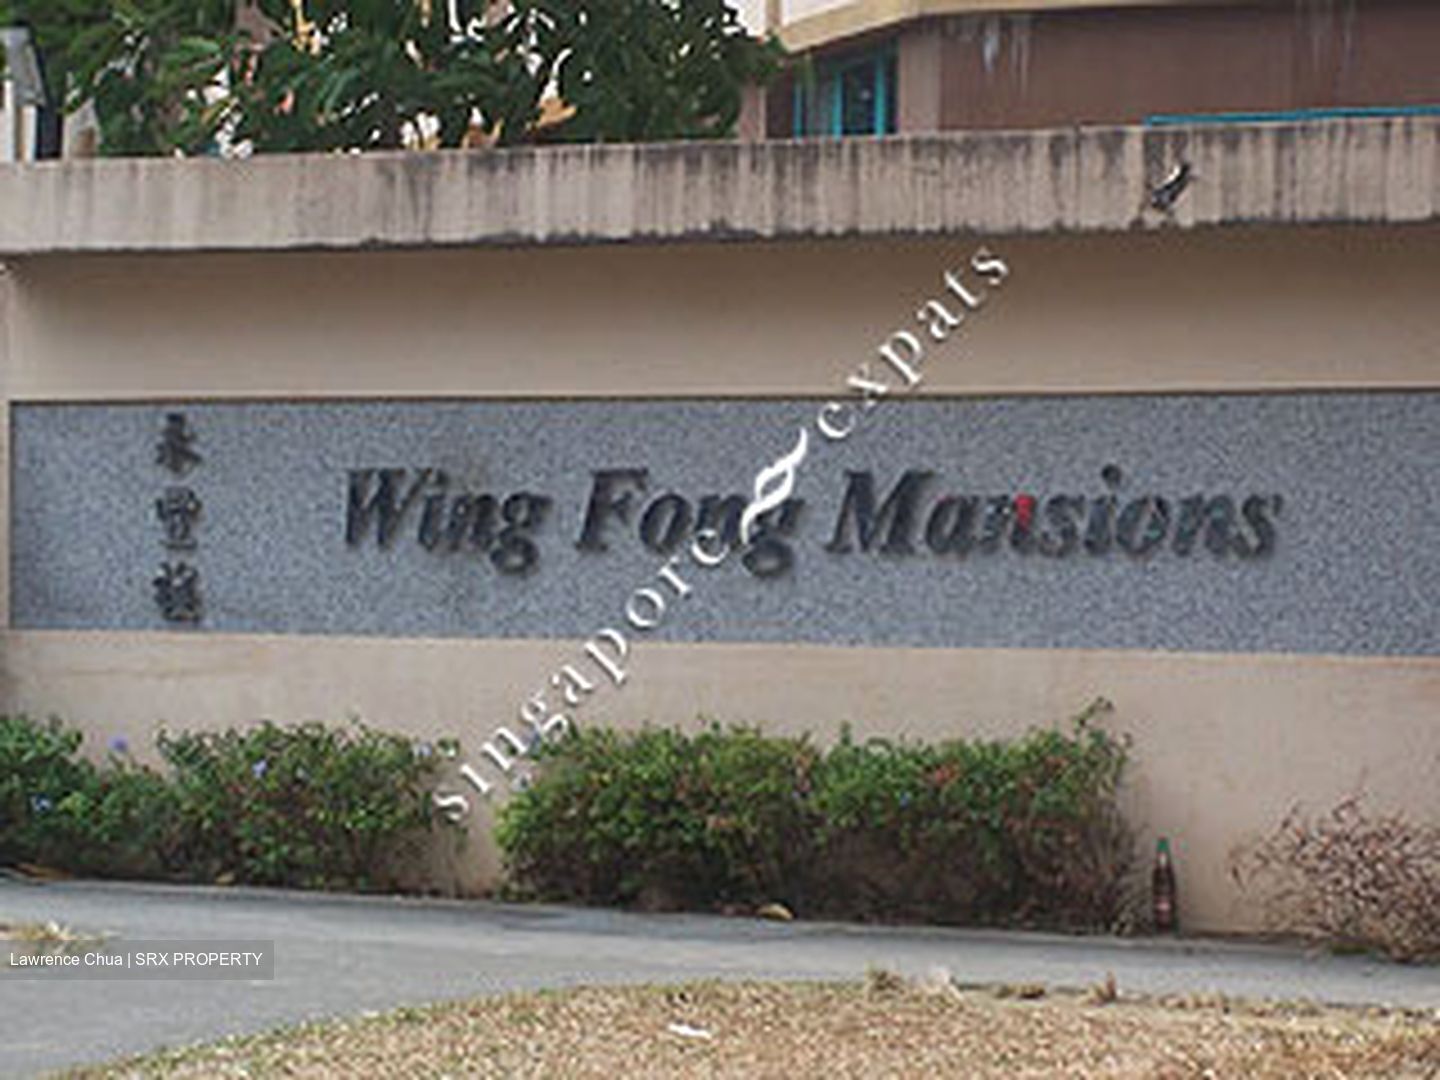 Wing Fong Mansions (D14), Apartment #402591181